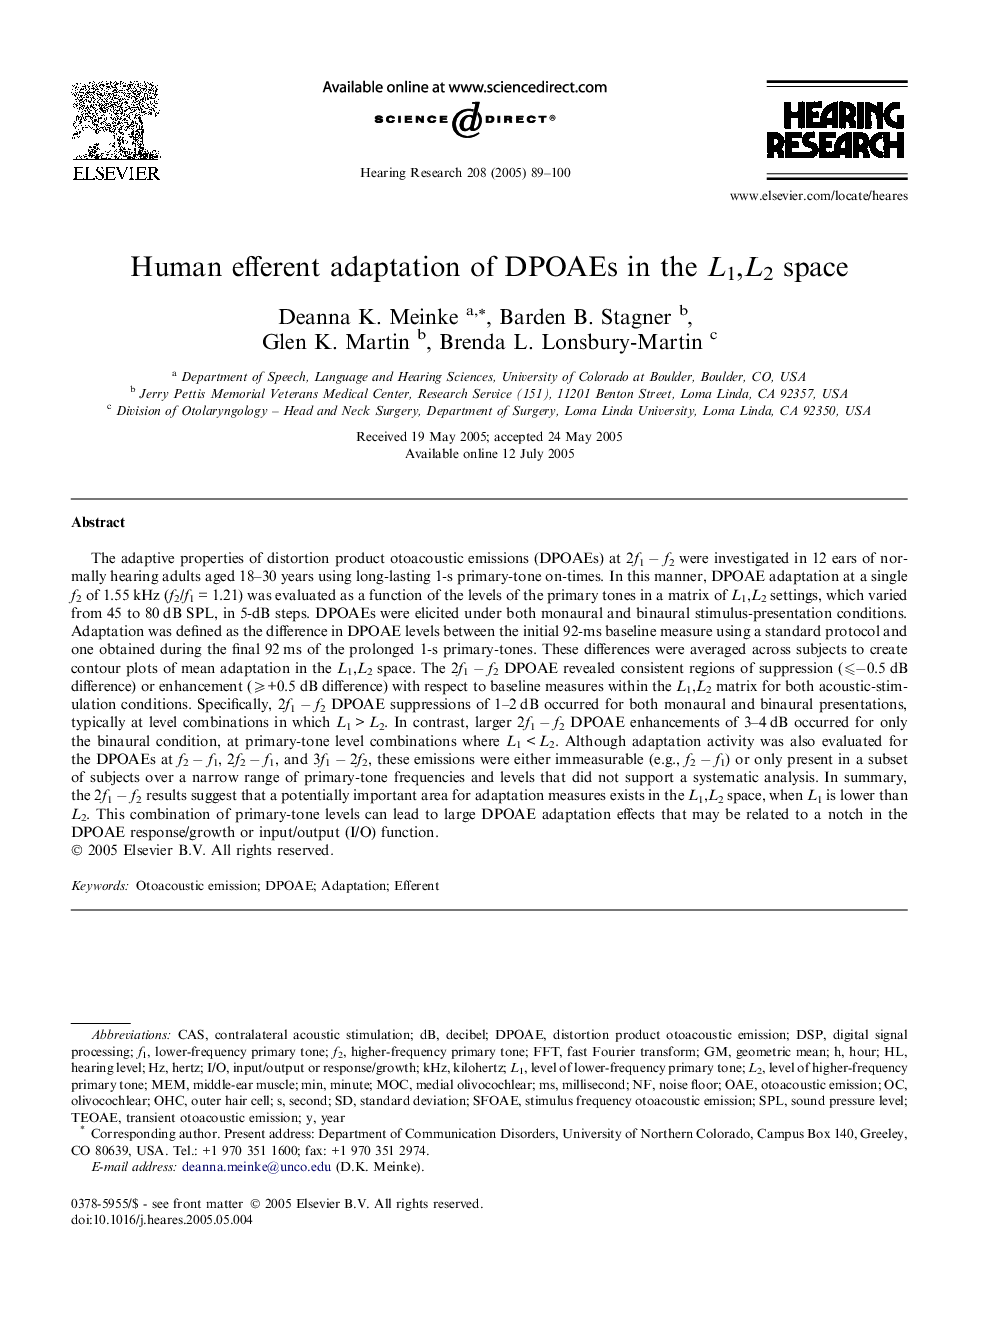 Human efferent adaptation of DPOAEs in the L1,L2 space